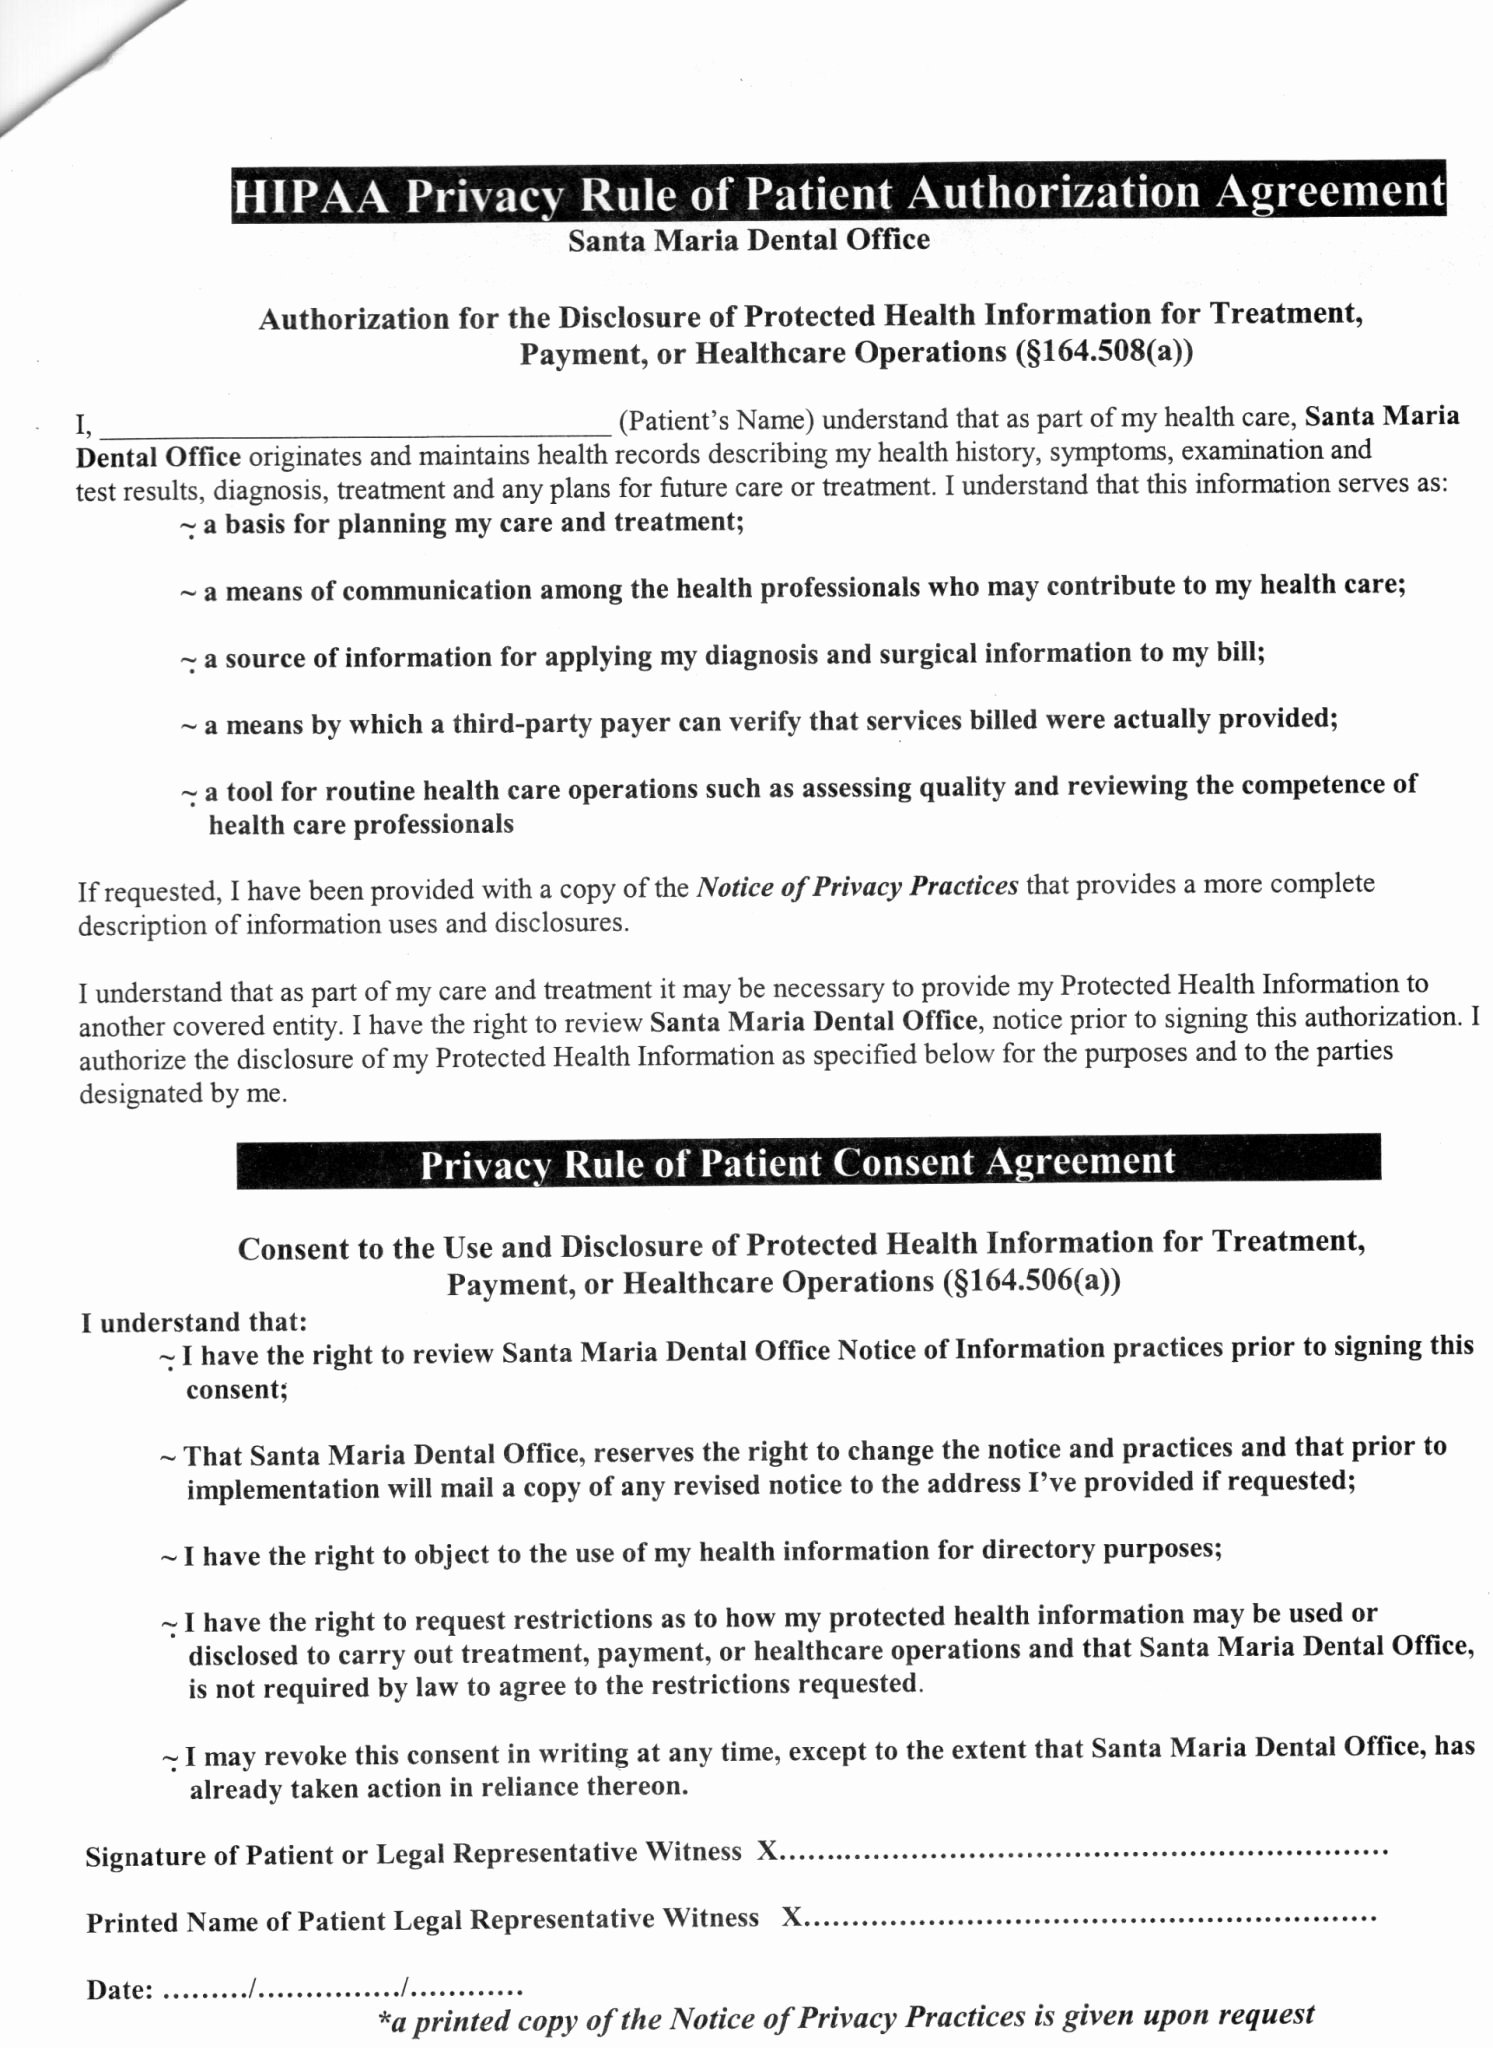 Mental Health Confidentiality Agreement Template Luxury Mental Health Confidentiality Agreement Template